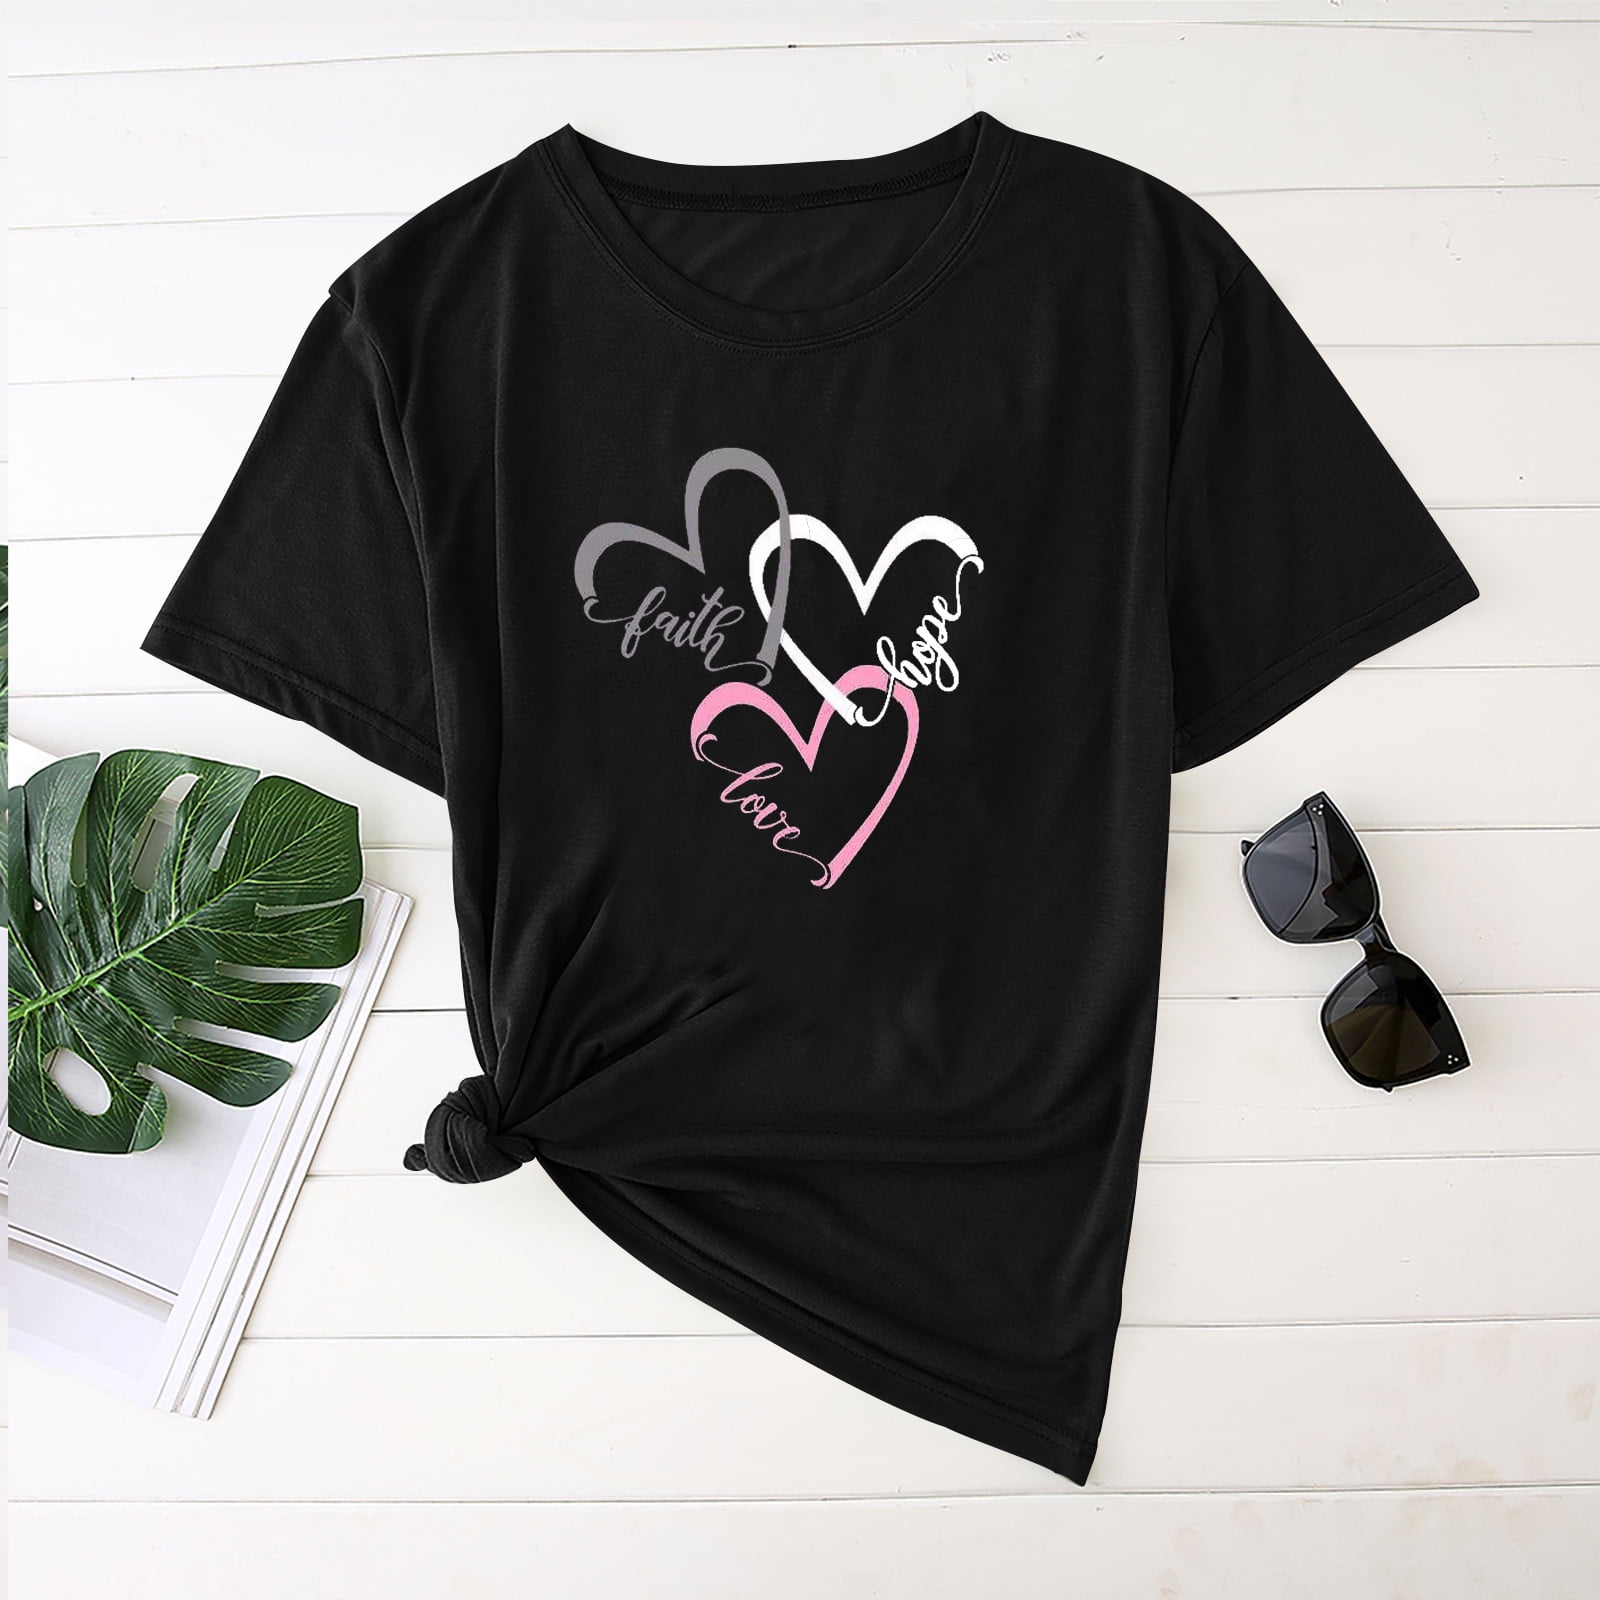 Short Sleeve Shirts for Women,Valentines Theme Fashion O Neck Tops Heart Graphic Printed Plus Size T Shirts Tunic Top